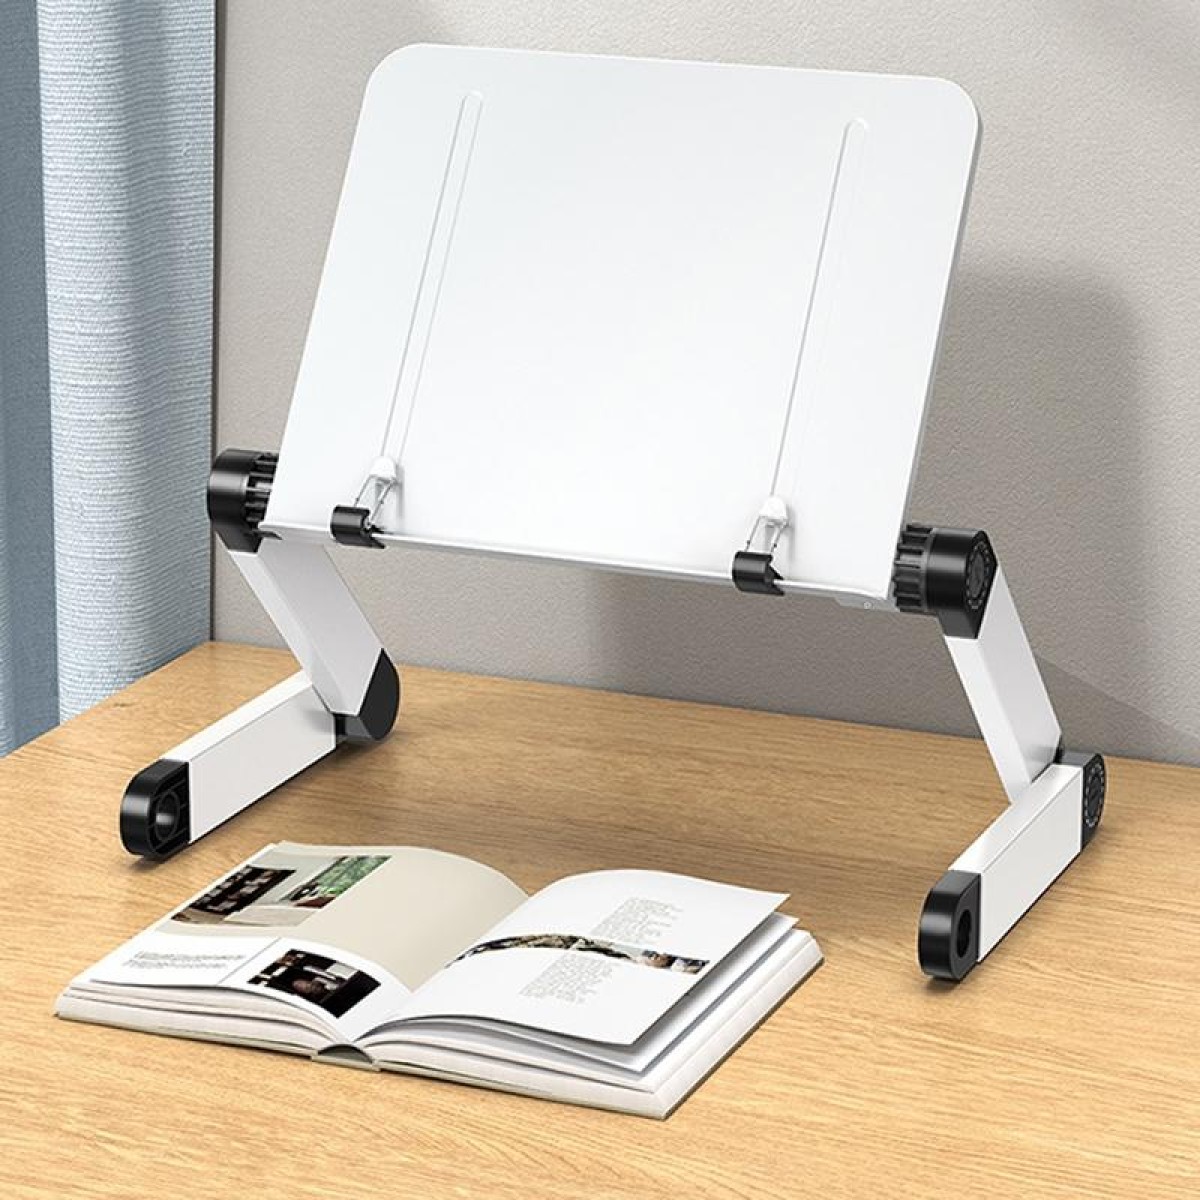 L03 Adjustable Lifting Reading Rack Book Holder Laptop Stand,Style： Double Section White